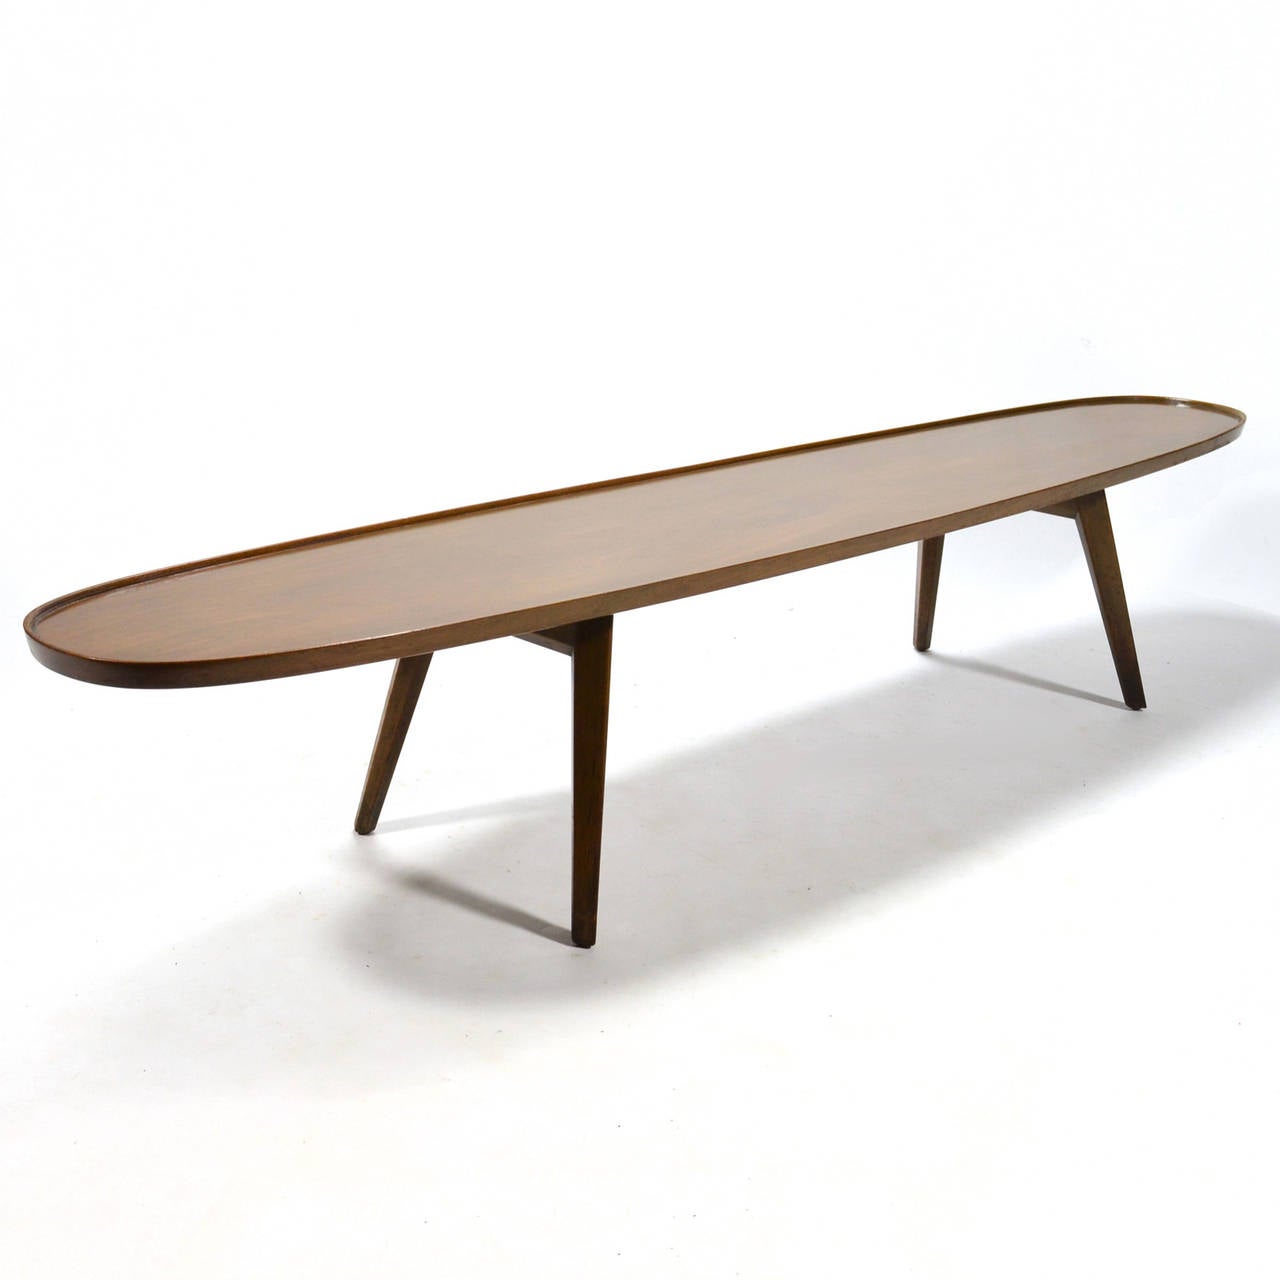 An early Edward Wormley design for Dunbar, this beautiful long walnut coffee table has the elongated elliptical shape of a vintage surfboard. It is supported by four splayed tapering legs with faceted sides and the top has a thin raised pie crust